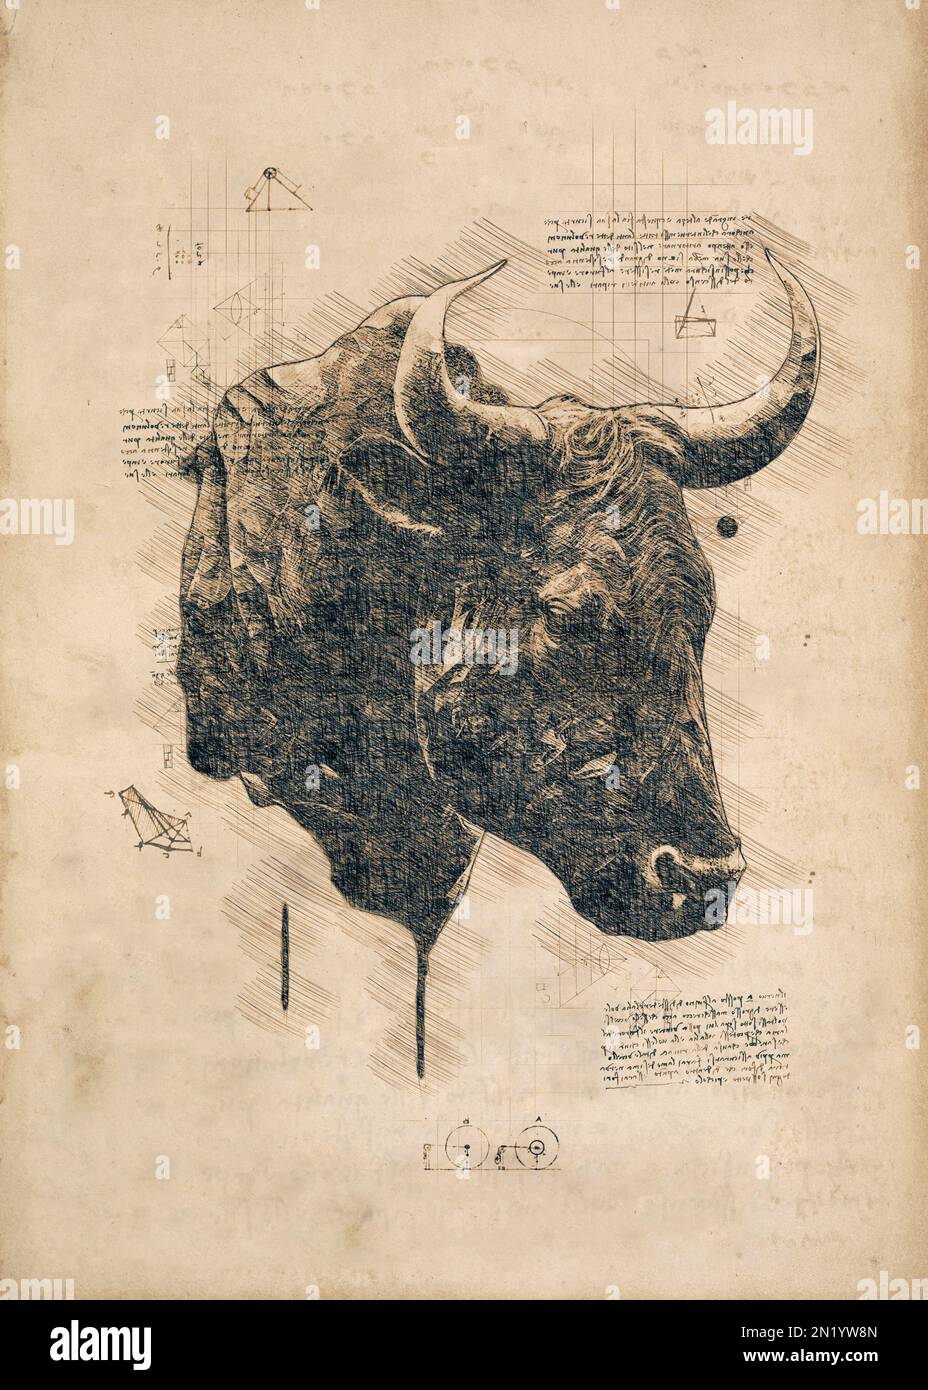 Digital sketch of a bull in old sketch style Stock Photo